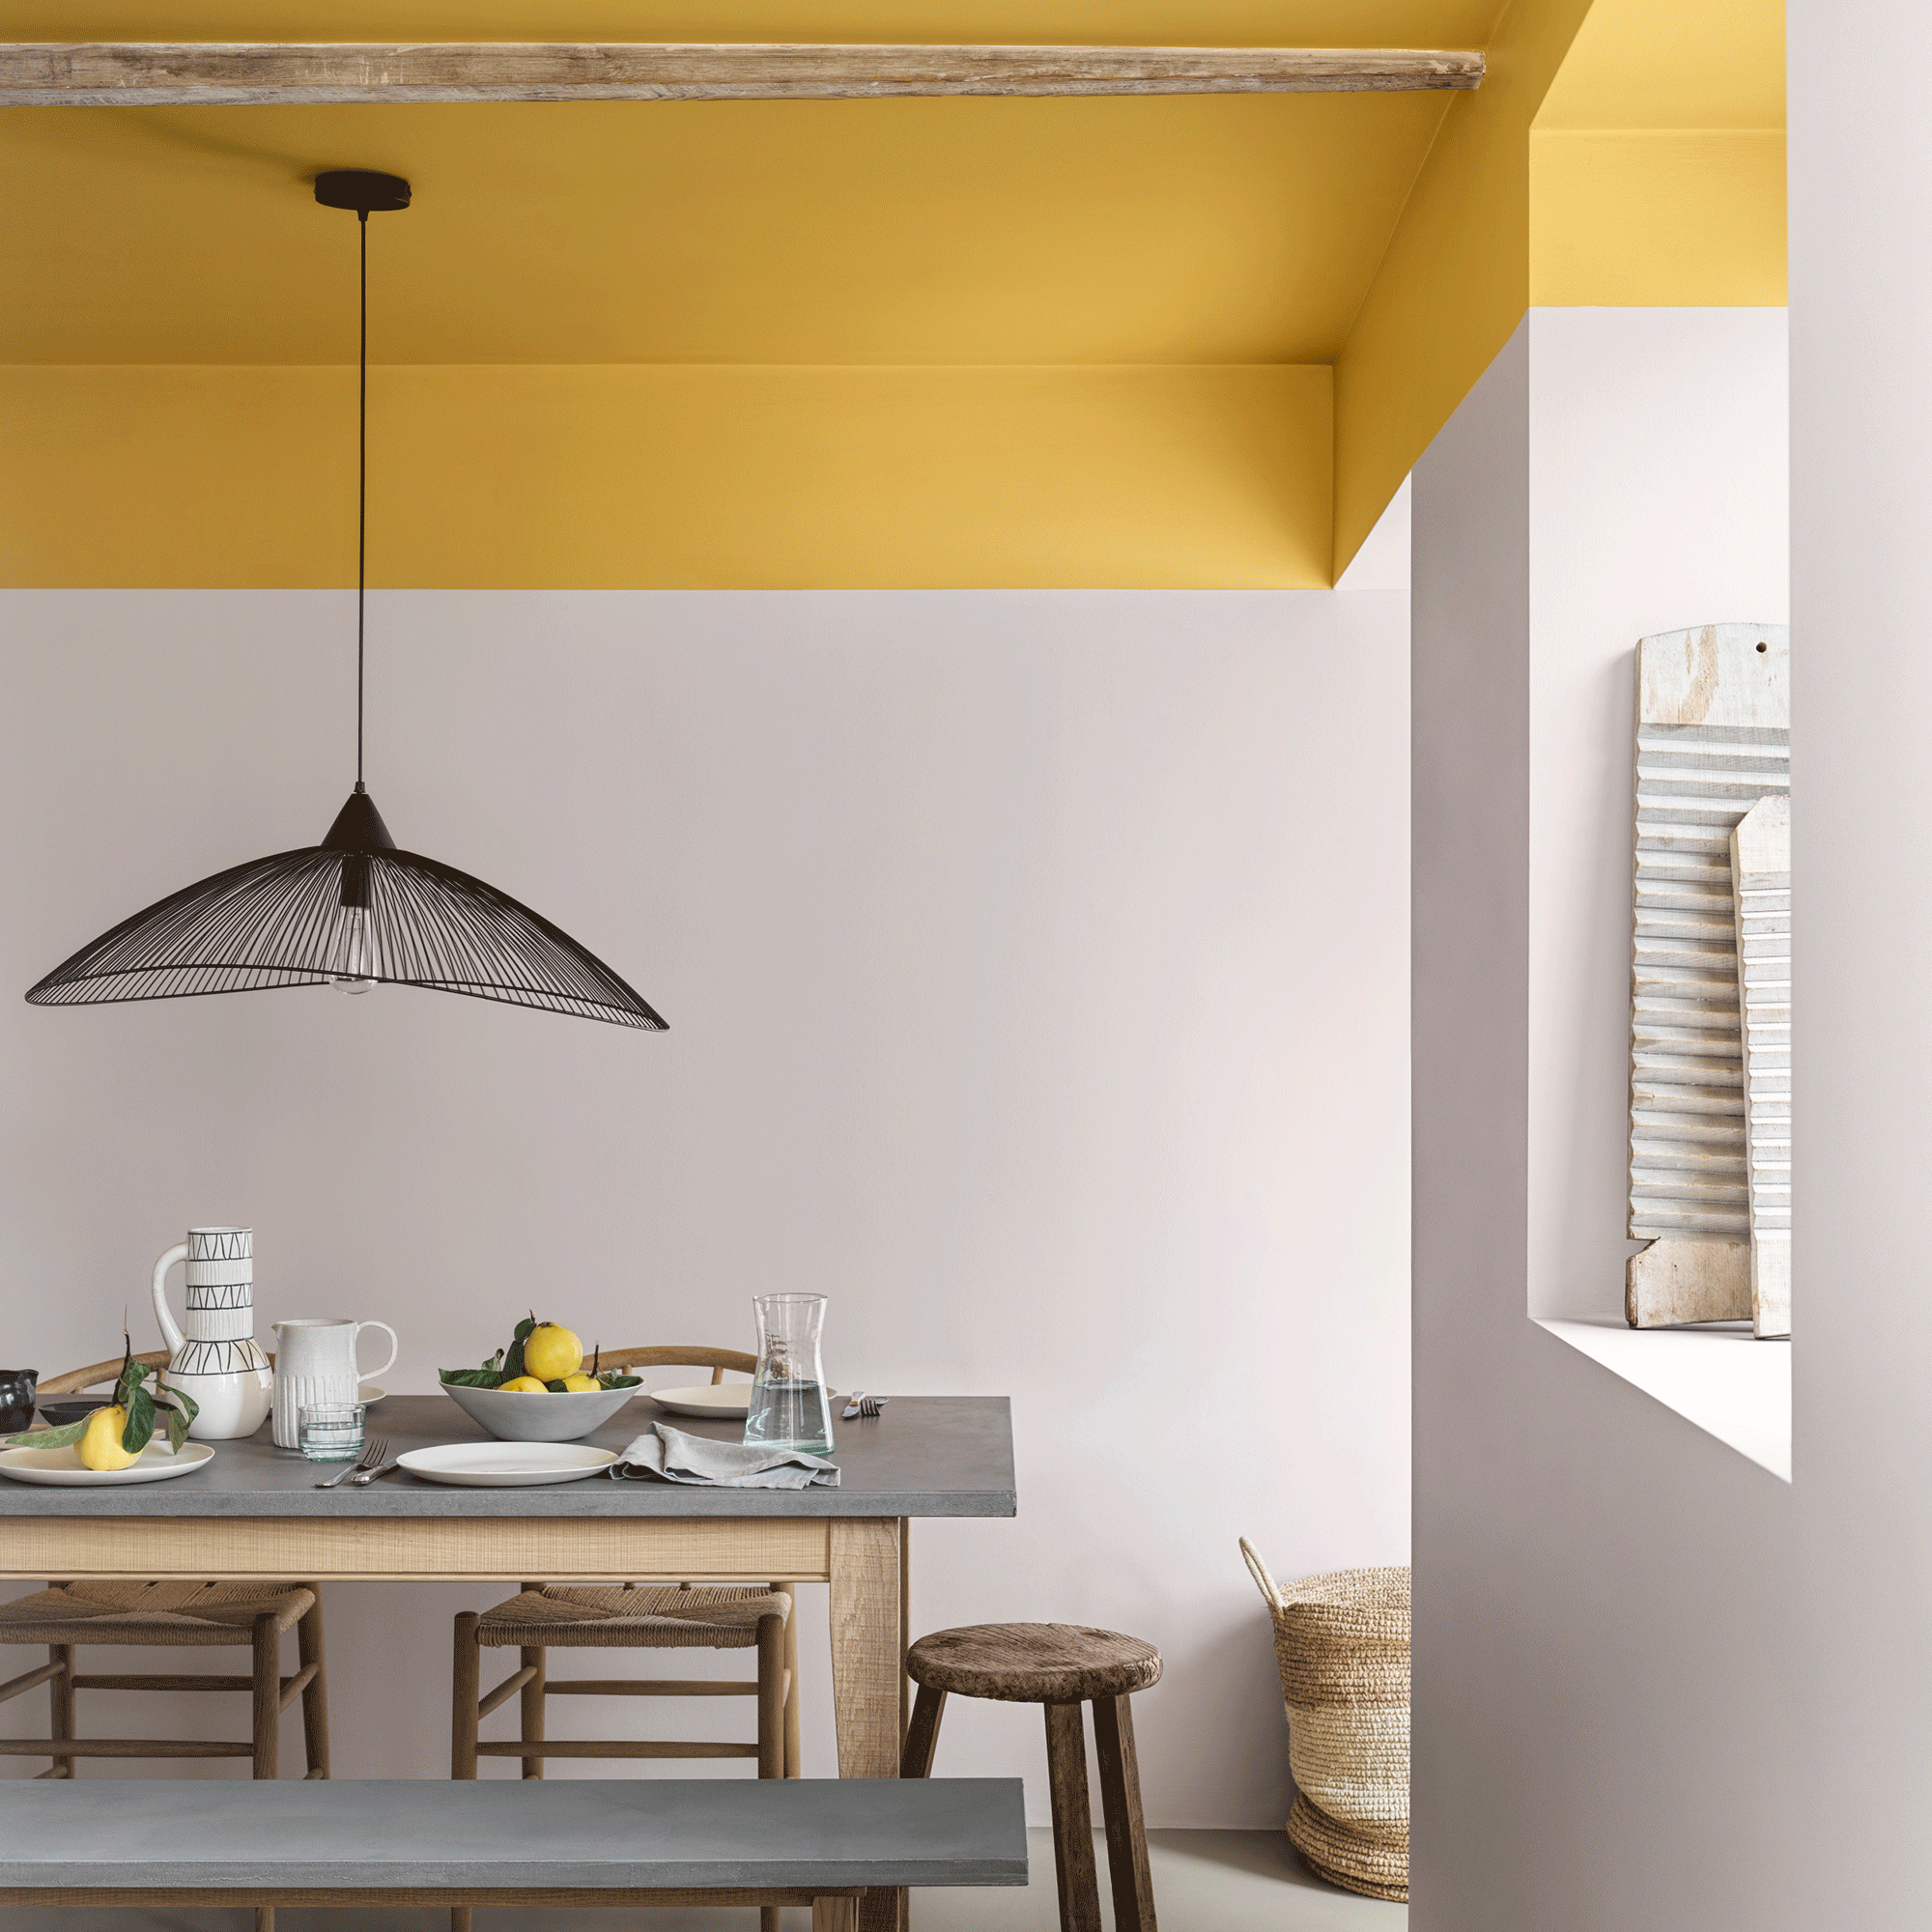 Dining room with yellow ceiling and black pendant light